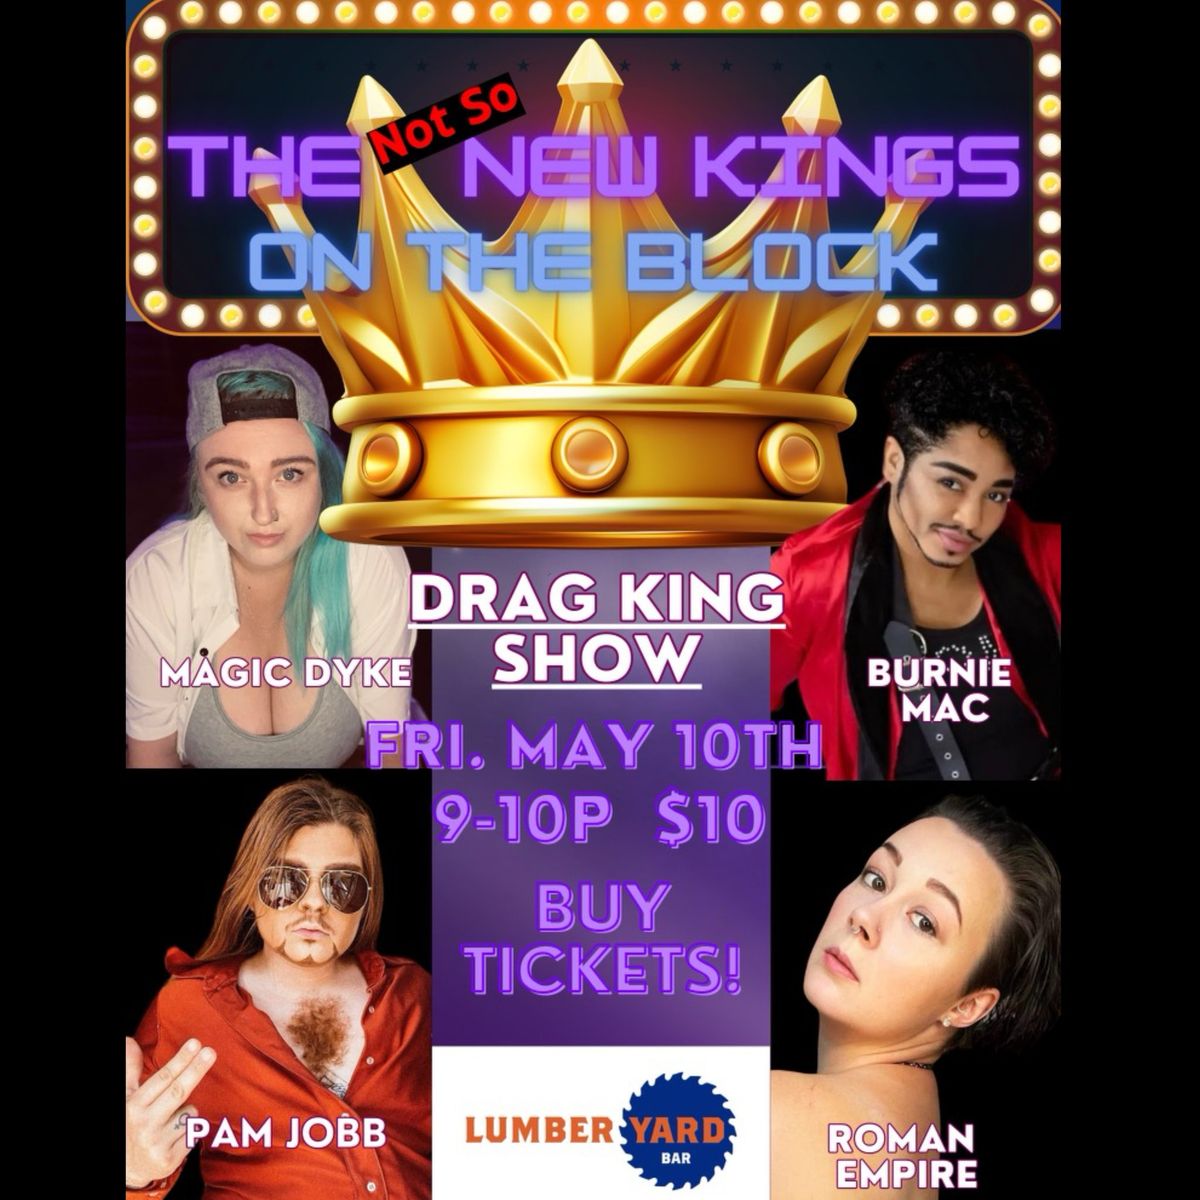 (Not So) New Kings on the Block Drag King Show